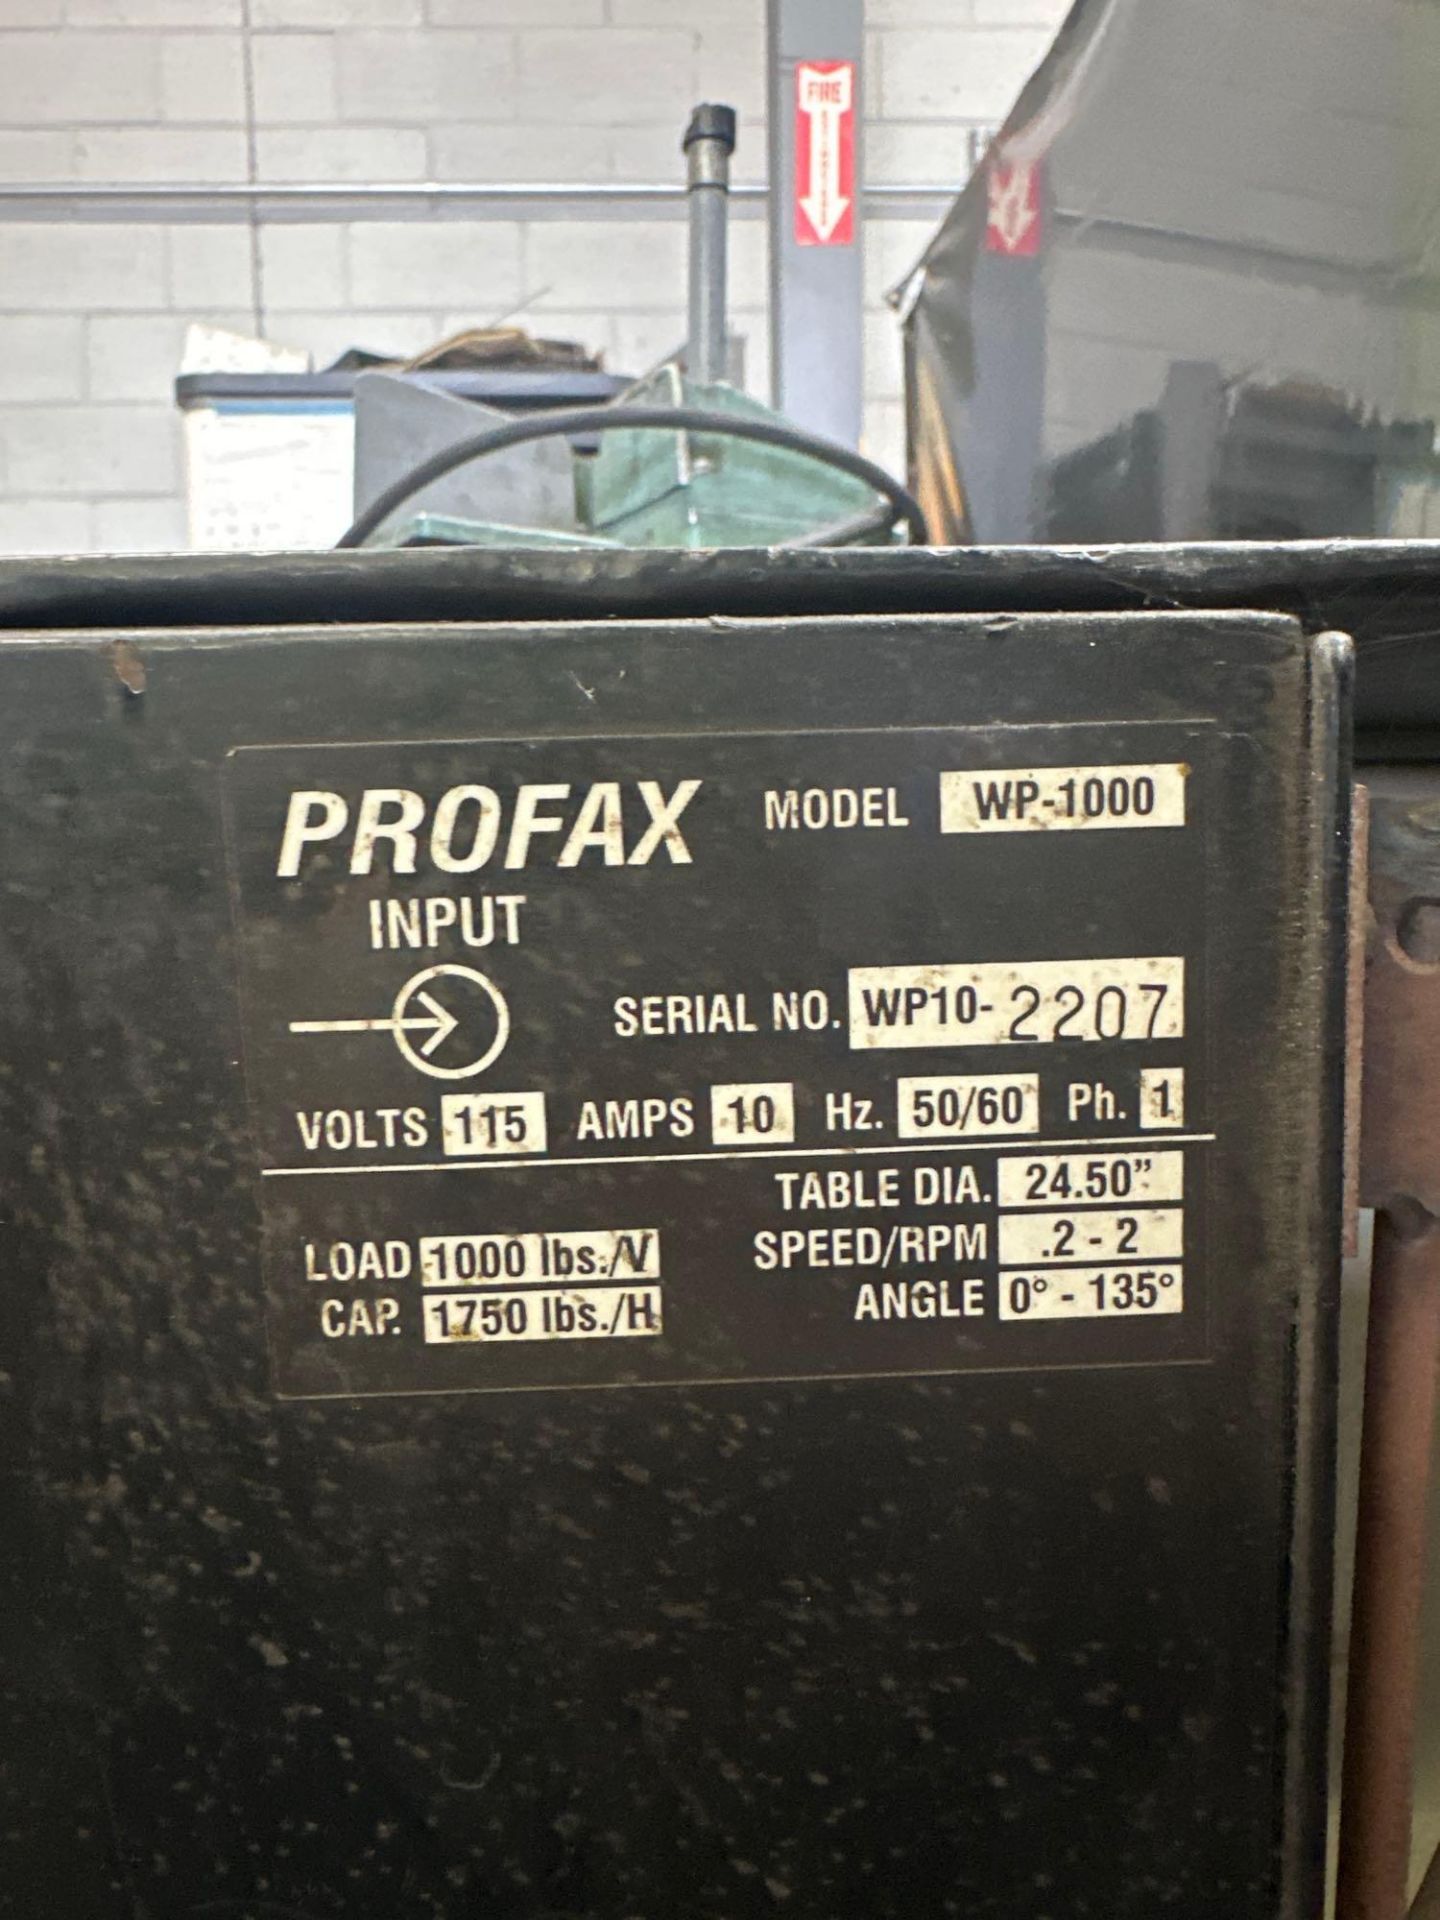 Profax WP-1000 Welding Postioner, 25.5” Table, 2 rpm, 1750lbs Cap, 0-135 Angle, 10” Chuck - Image 8 of 8